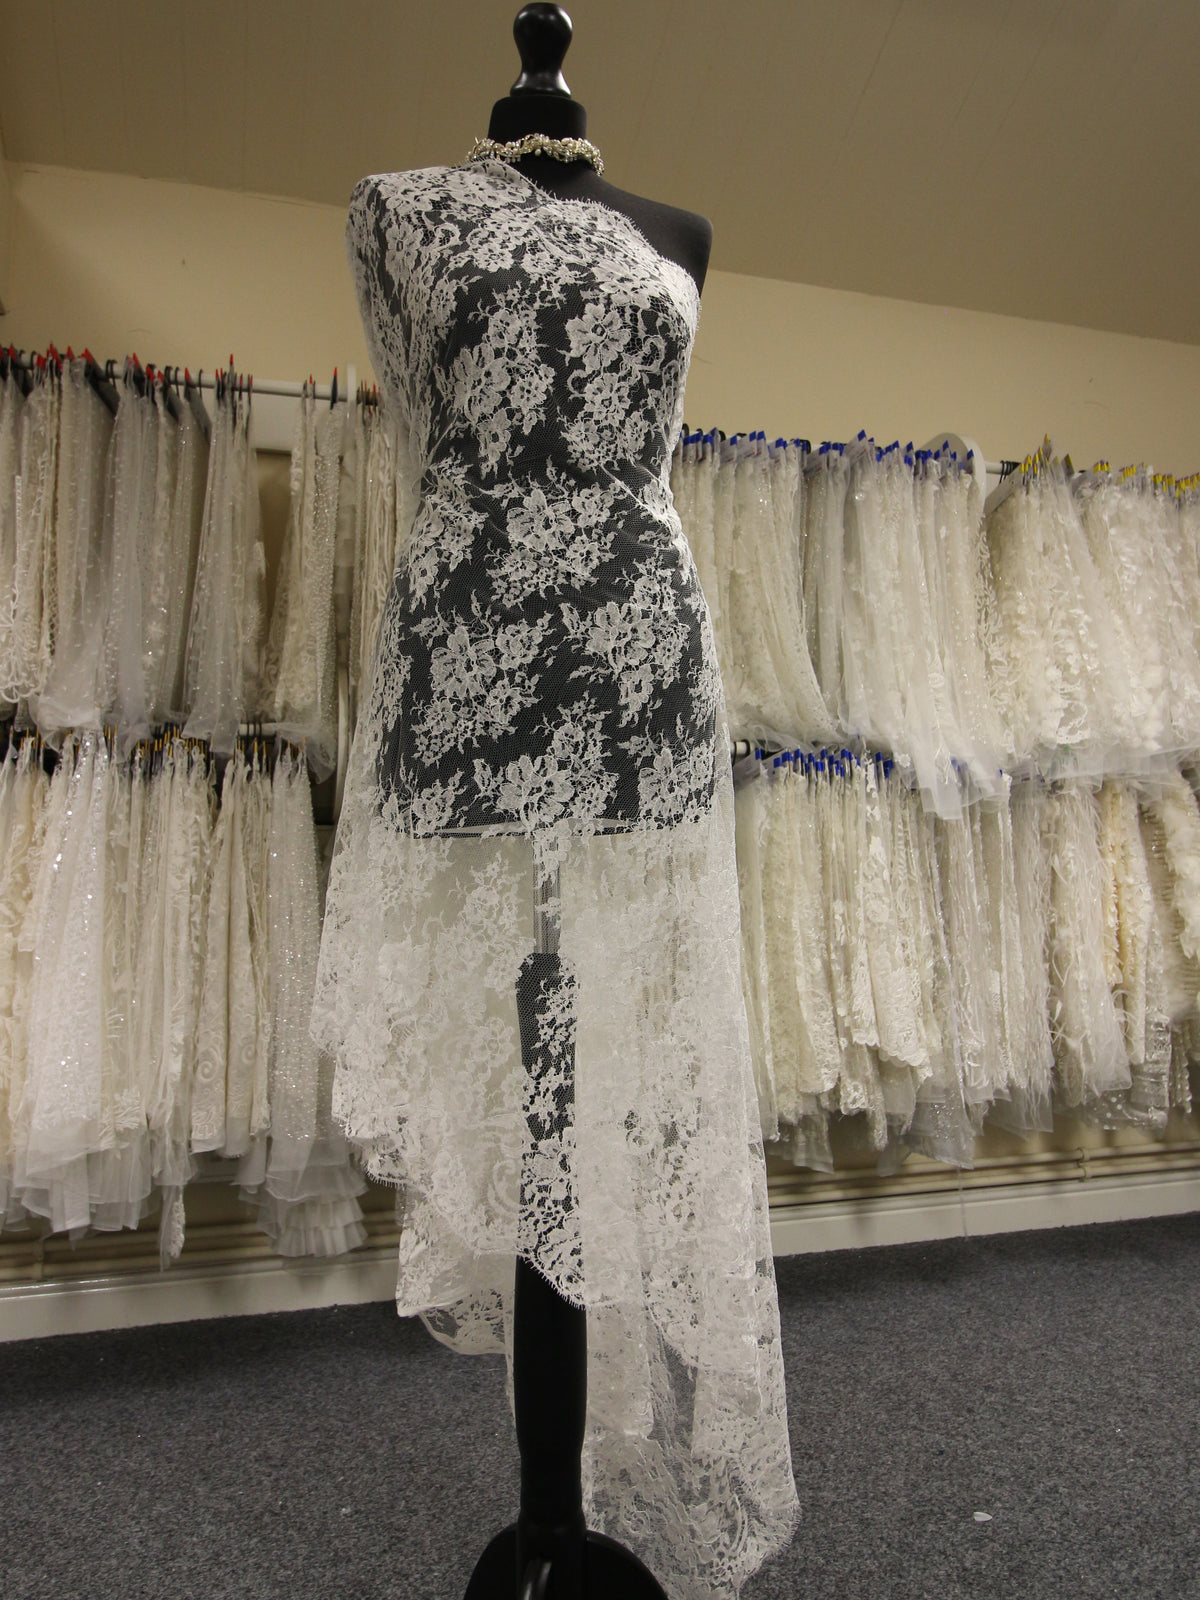 Moosa's Fabrics - Chantilly Lace - Vintage Perfection, with double sided  fringe - available in off white and black - #vintage #chantilly  #chantillylace #weddingdress #fabric #couture #eveningdress #bridal  #vintagestyle #bridalfashion #hautecouture